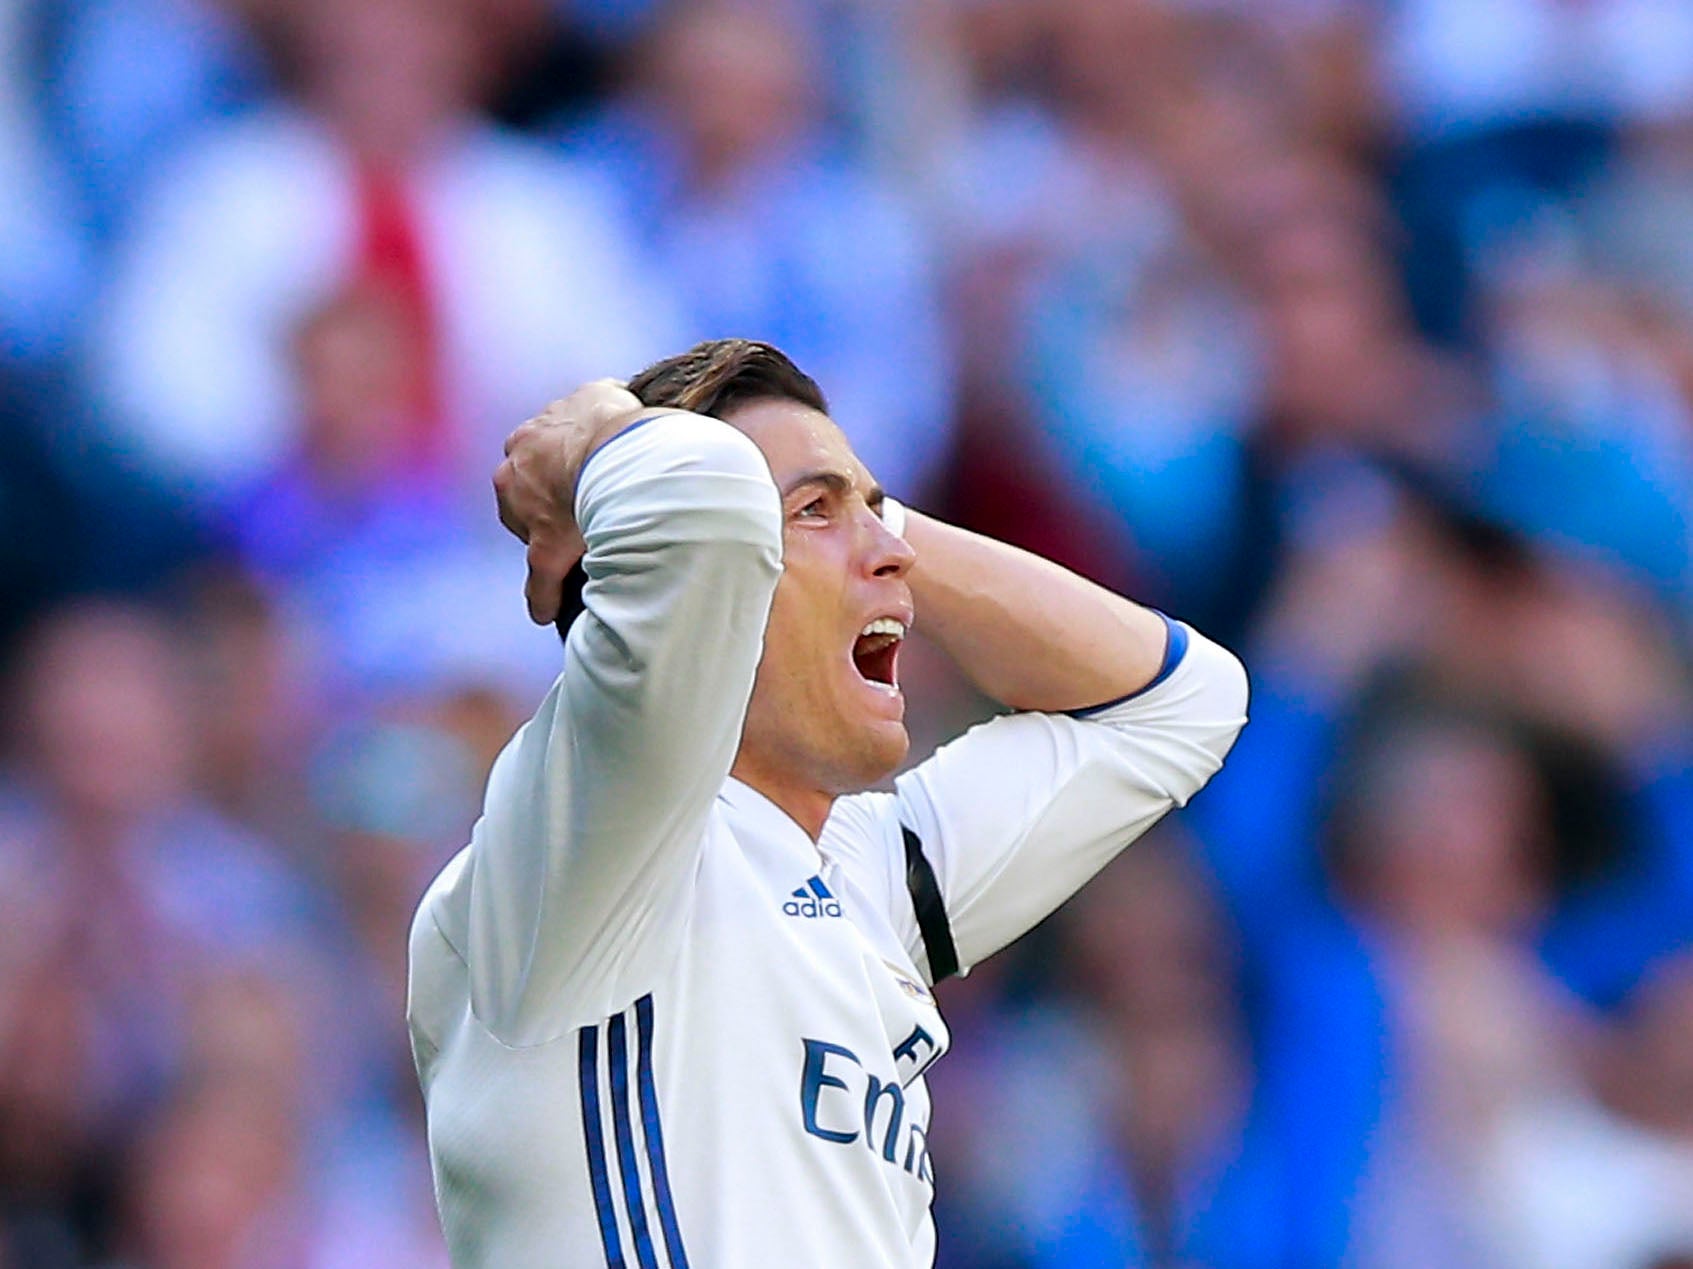 Ronaldo is on a downward trajectory after more than 10 years at the top